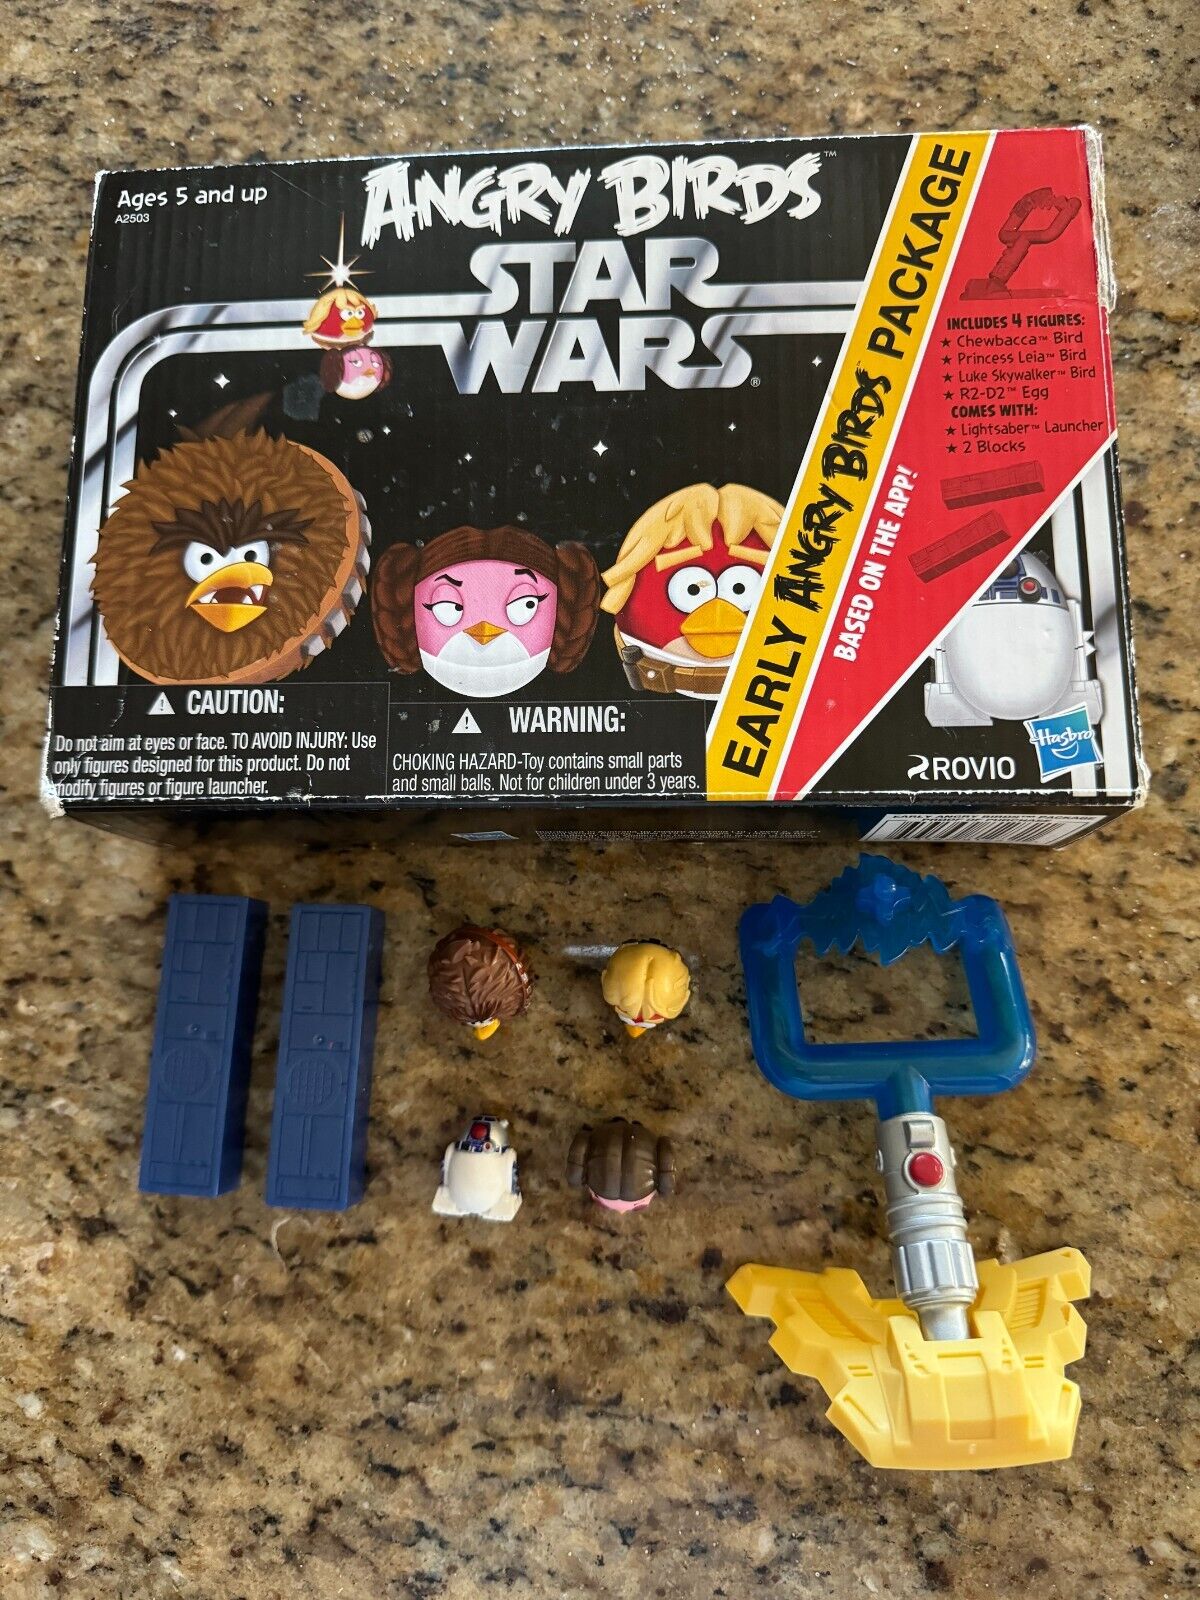 Hasbro Star Wars Early Angry Birds Package COMPLETE